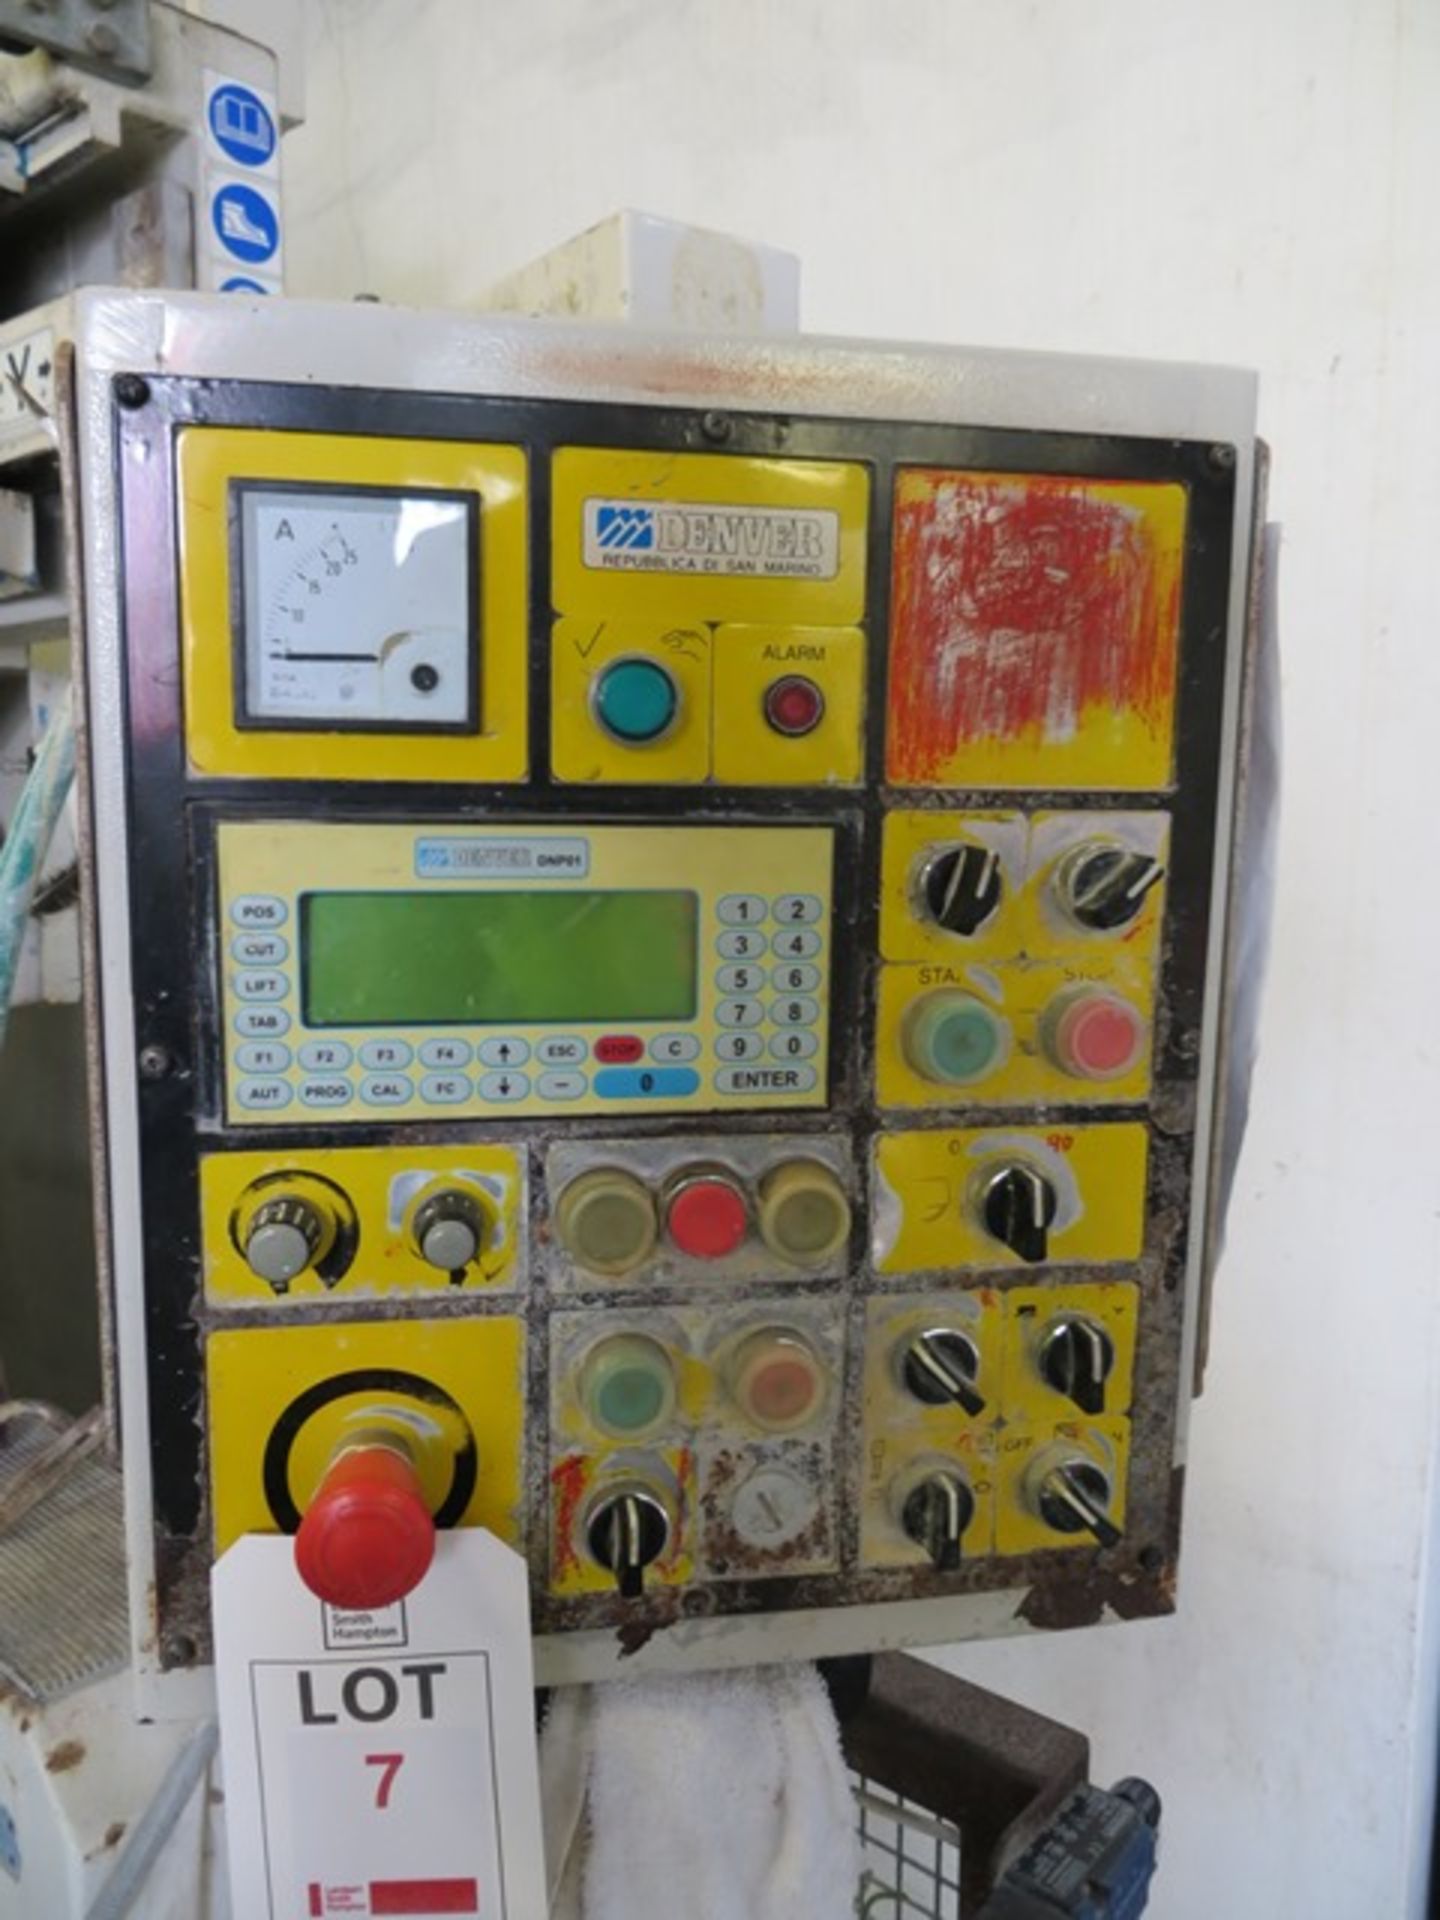 Denver Skema Logic monobloc bridge saw with wire safety guard and OSAI control panel (c2002). A work - Image 4 of 5